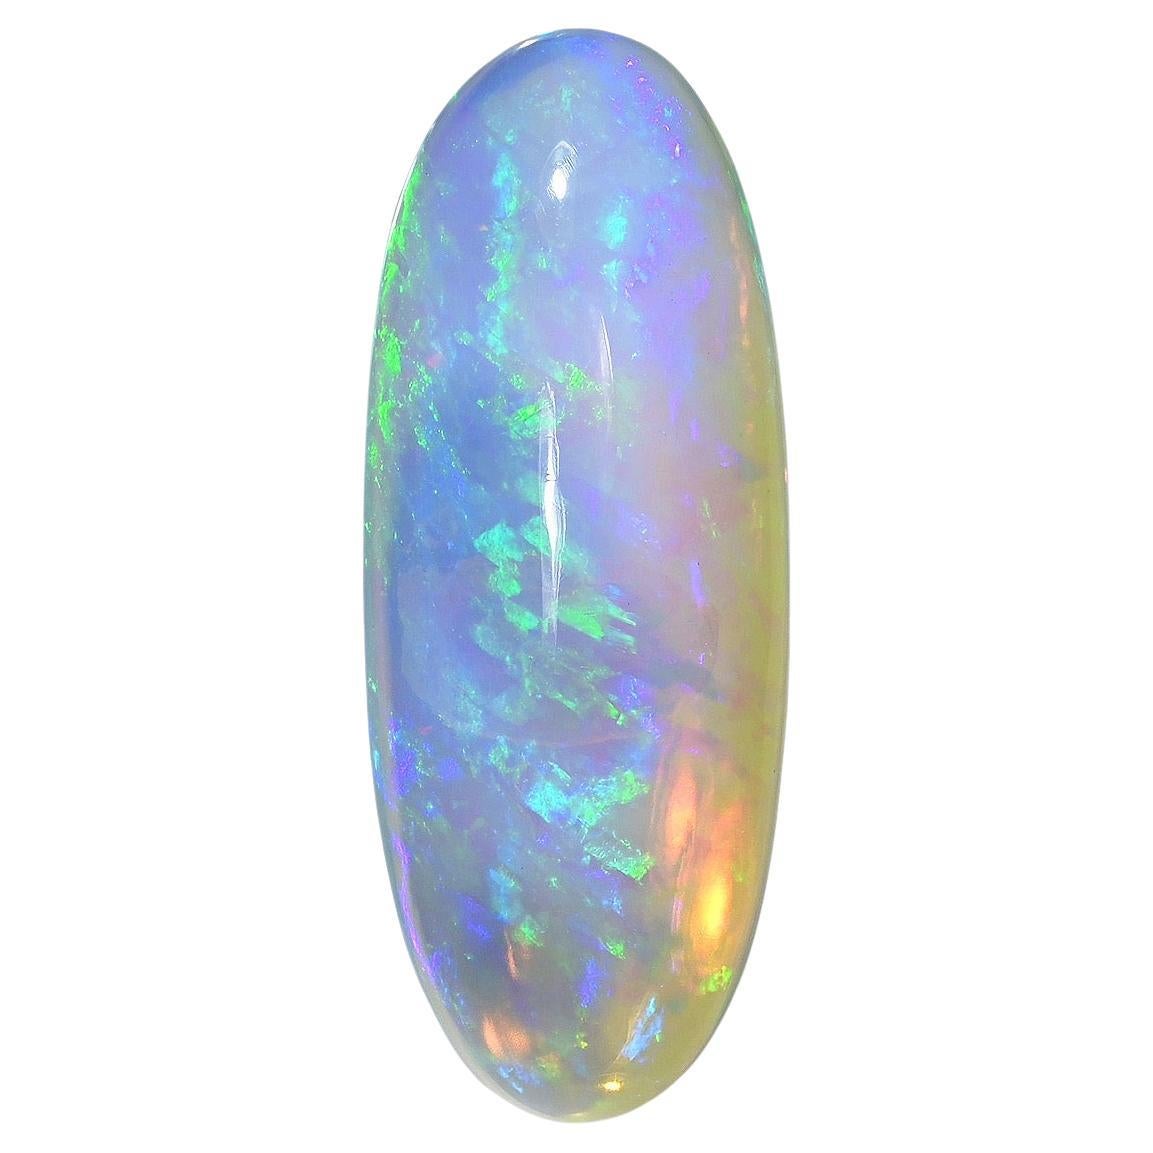 Opal Stone 27.42 Carat Natural Ethiopian Oval loose Gemstone For Sale